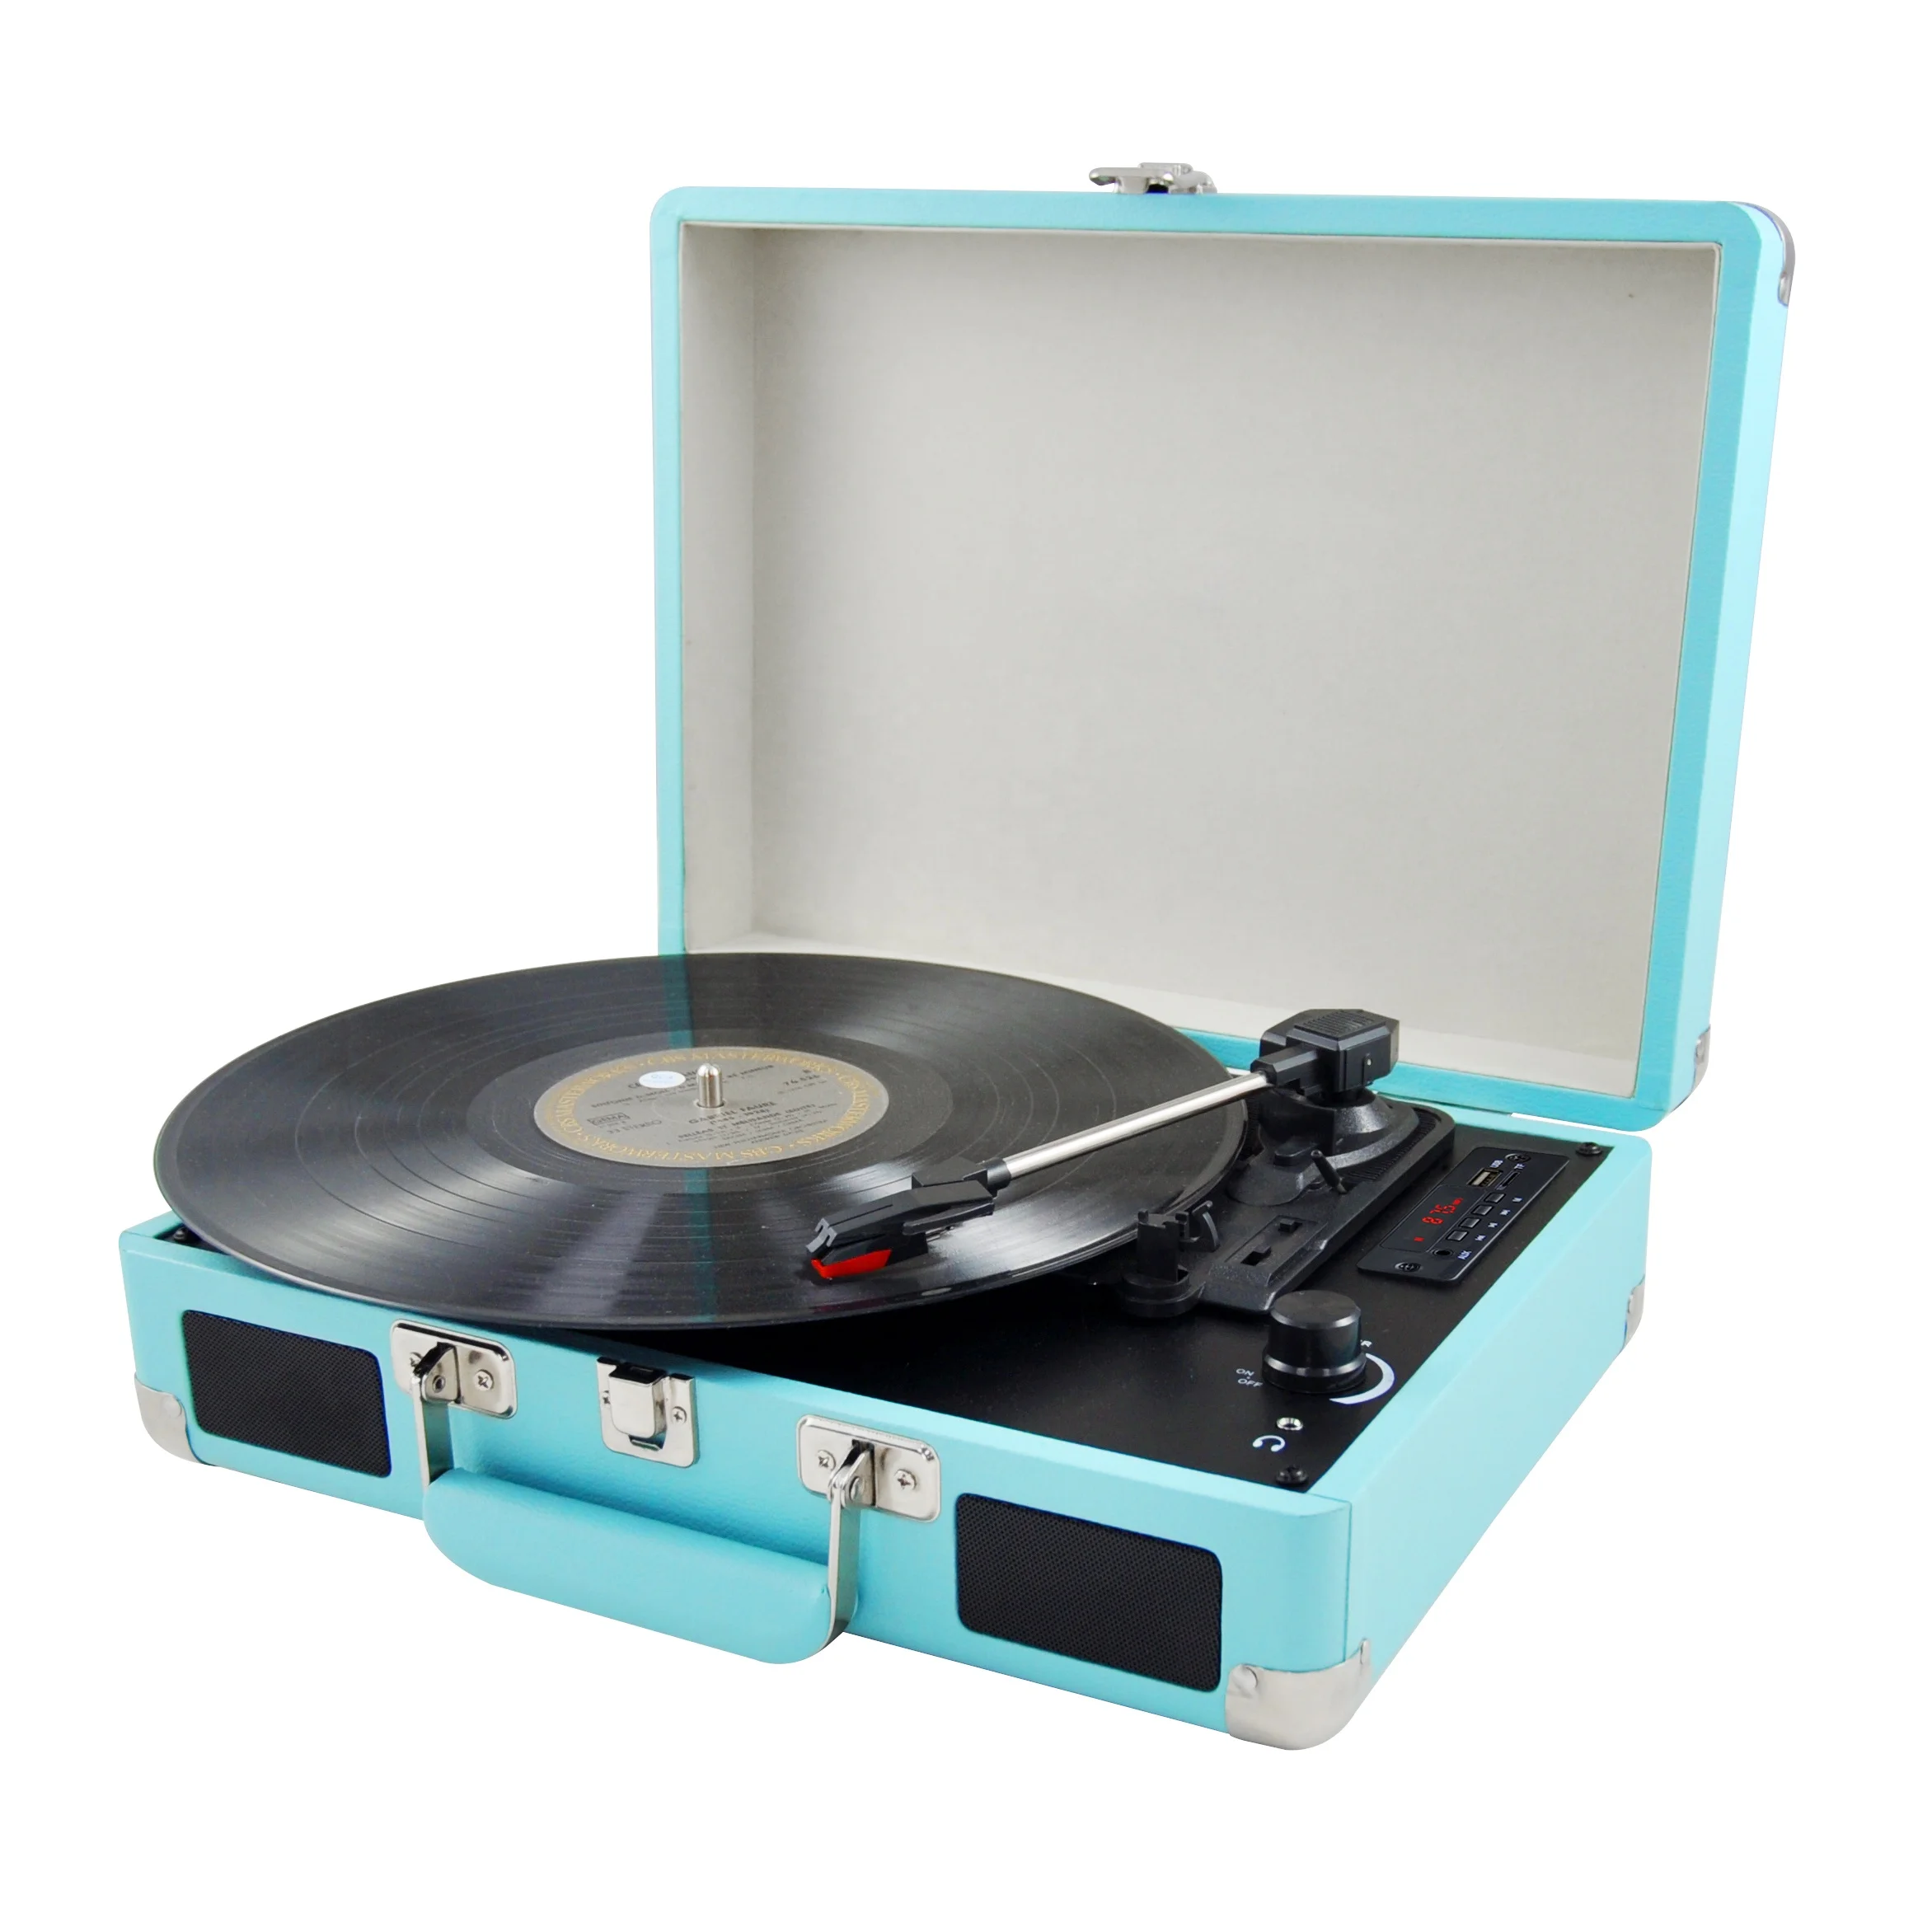 33 record players for sale